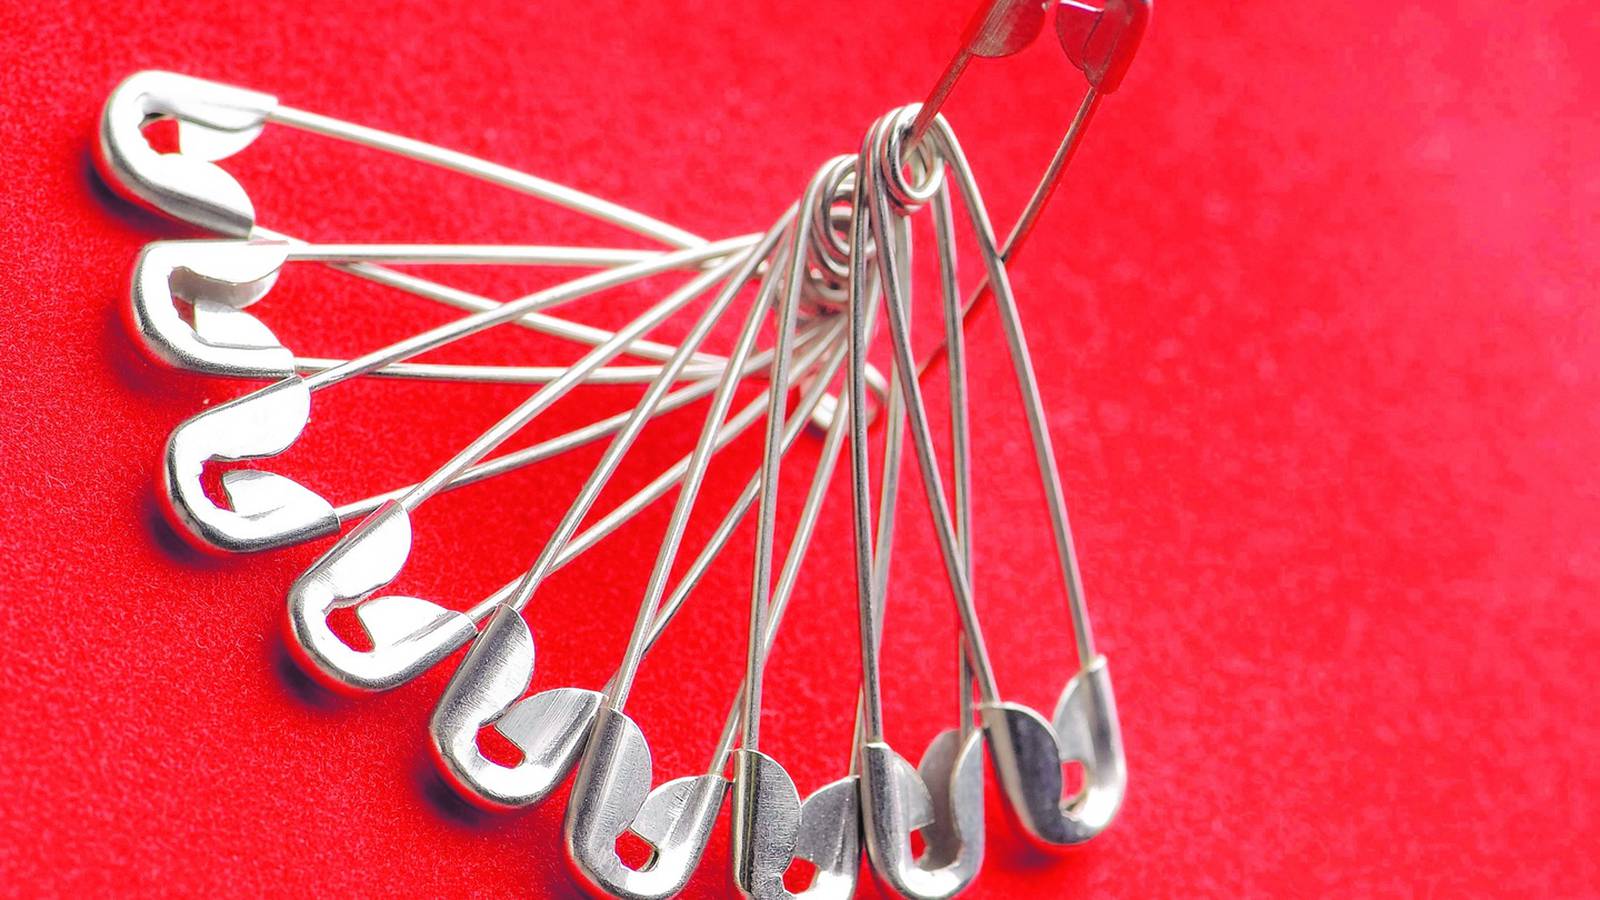 When Was the Safety Pin Invented?